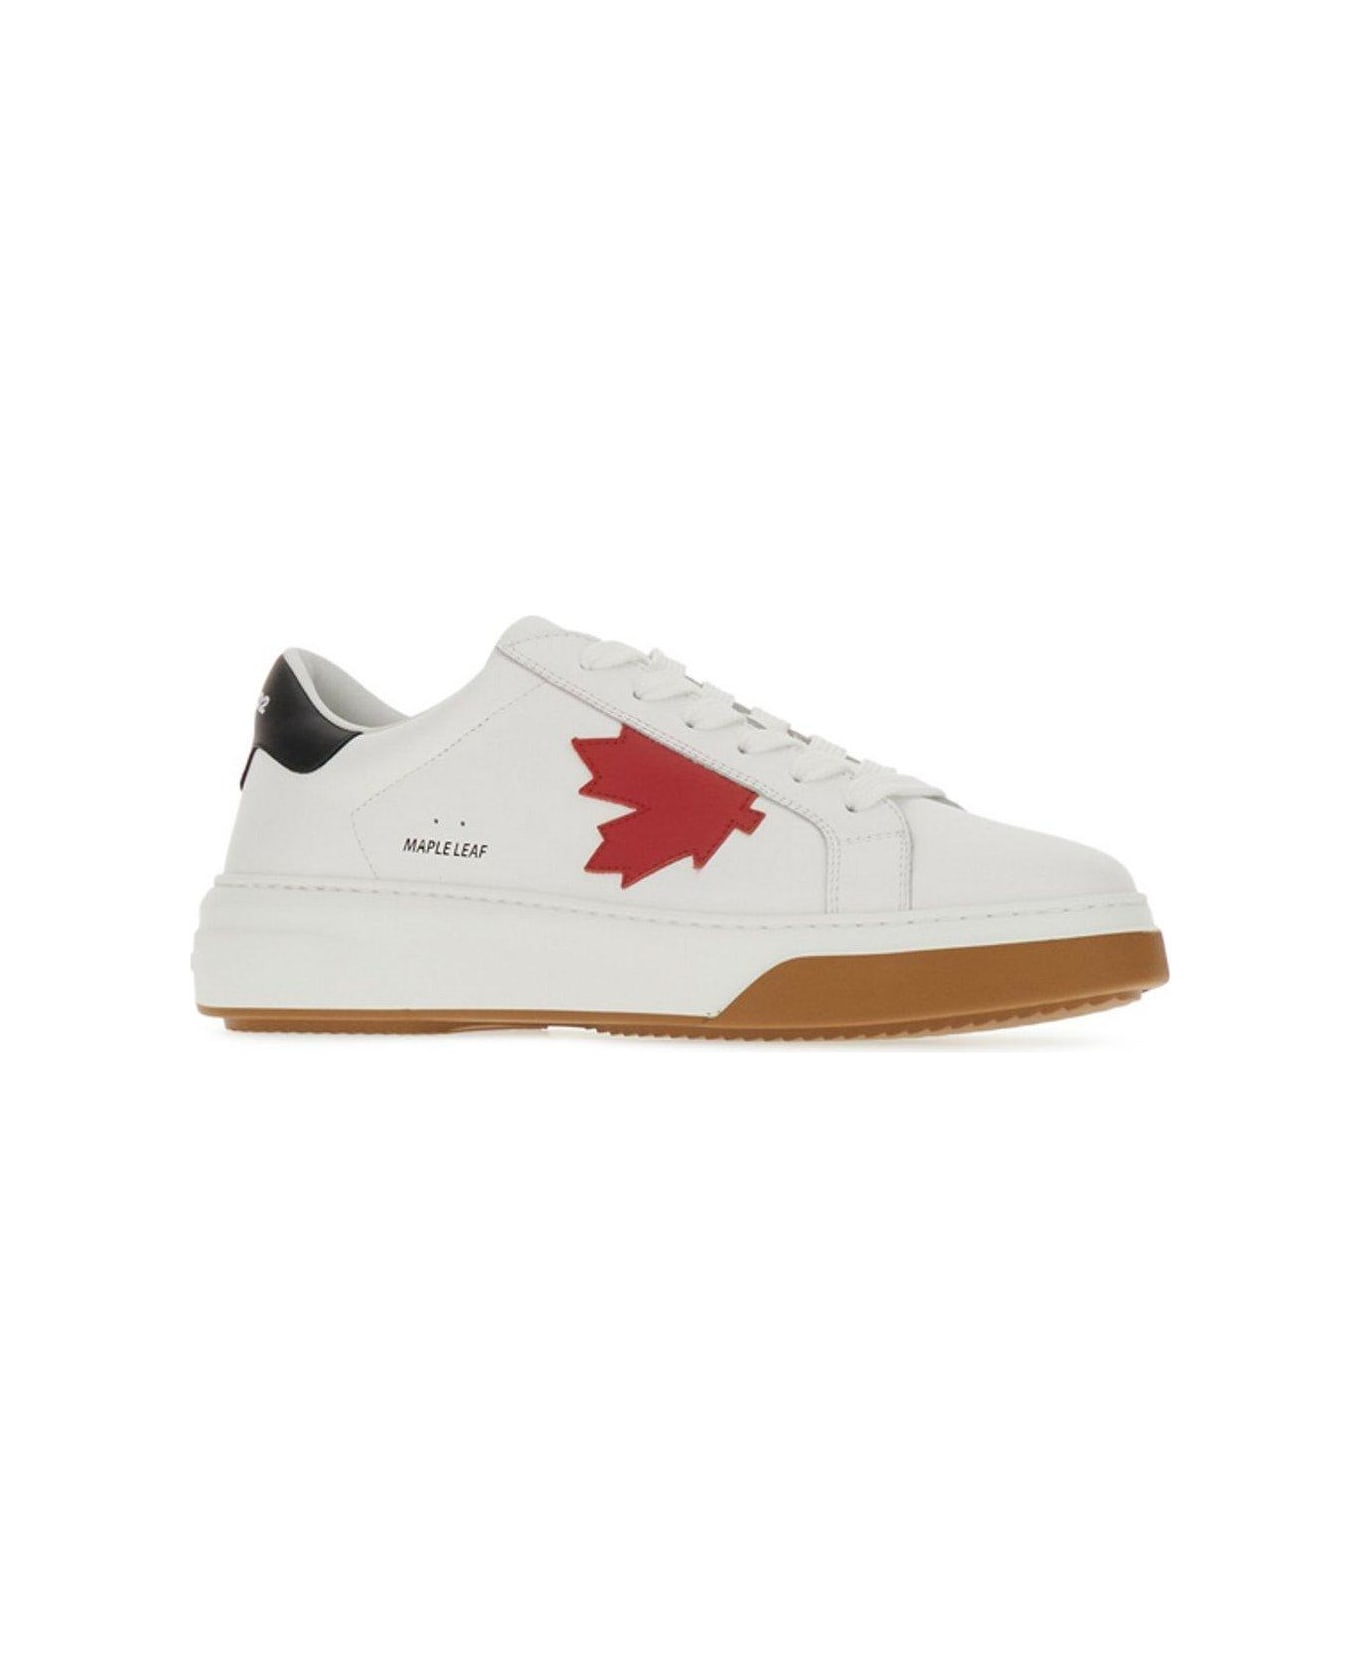 Dsquared2 Bumper Round Toe Lace-up Sneakers - White/red/black